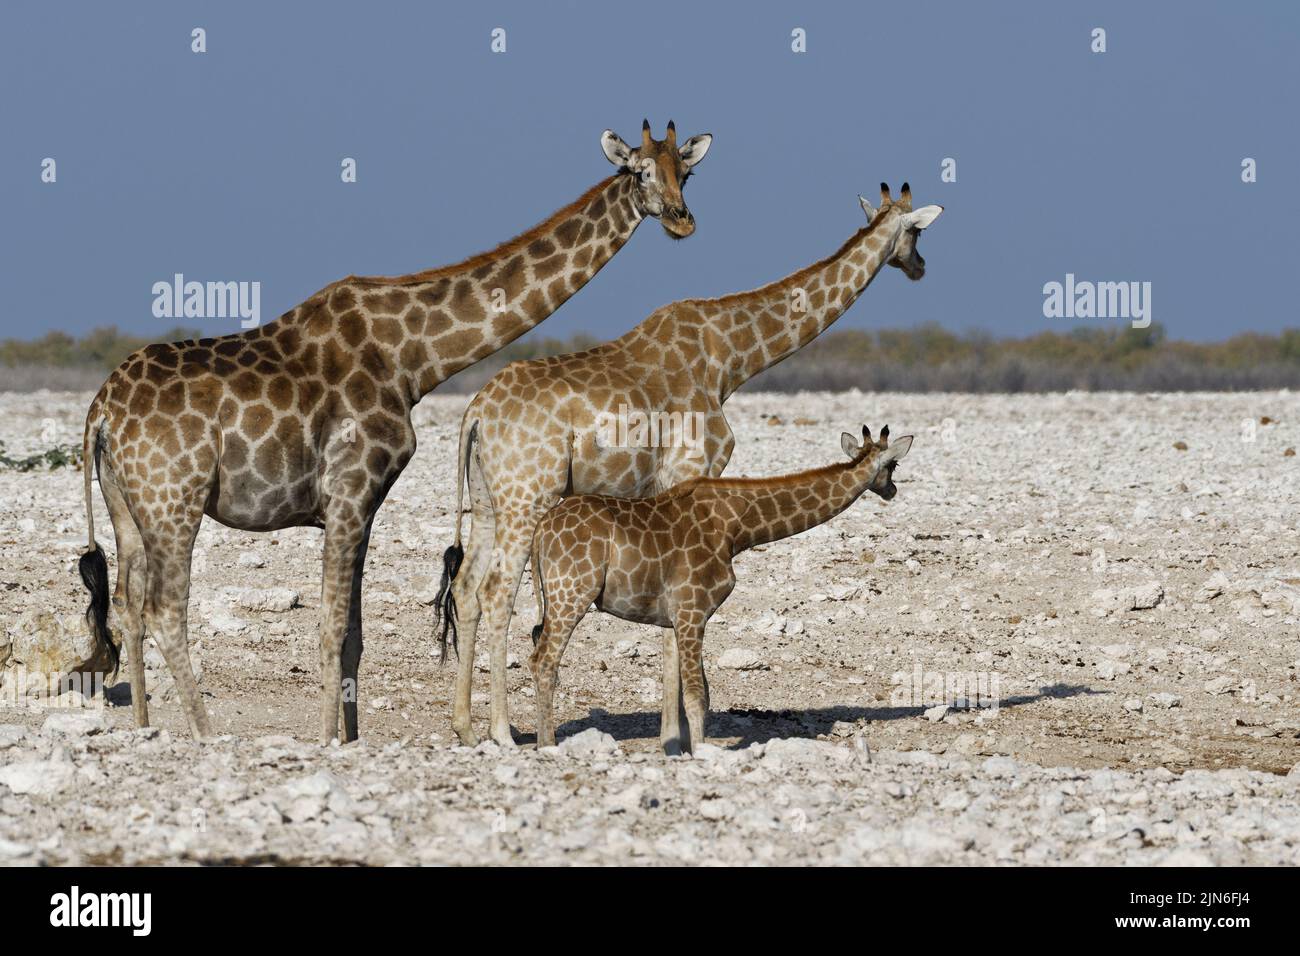 Angolan giraffes (Giraffa camelopardalis angolensis), adult female (left) with young female and foal at waterhole, alert, Etosha National Park,Namibia Stock Photo